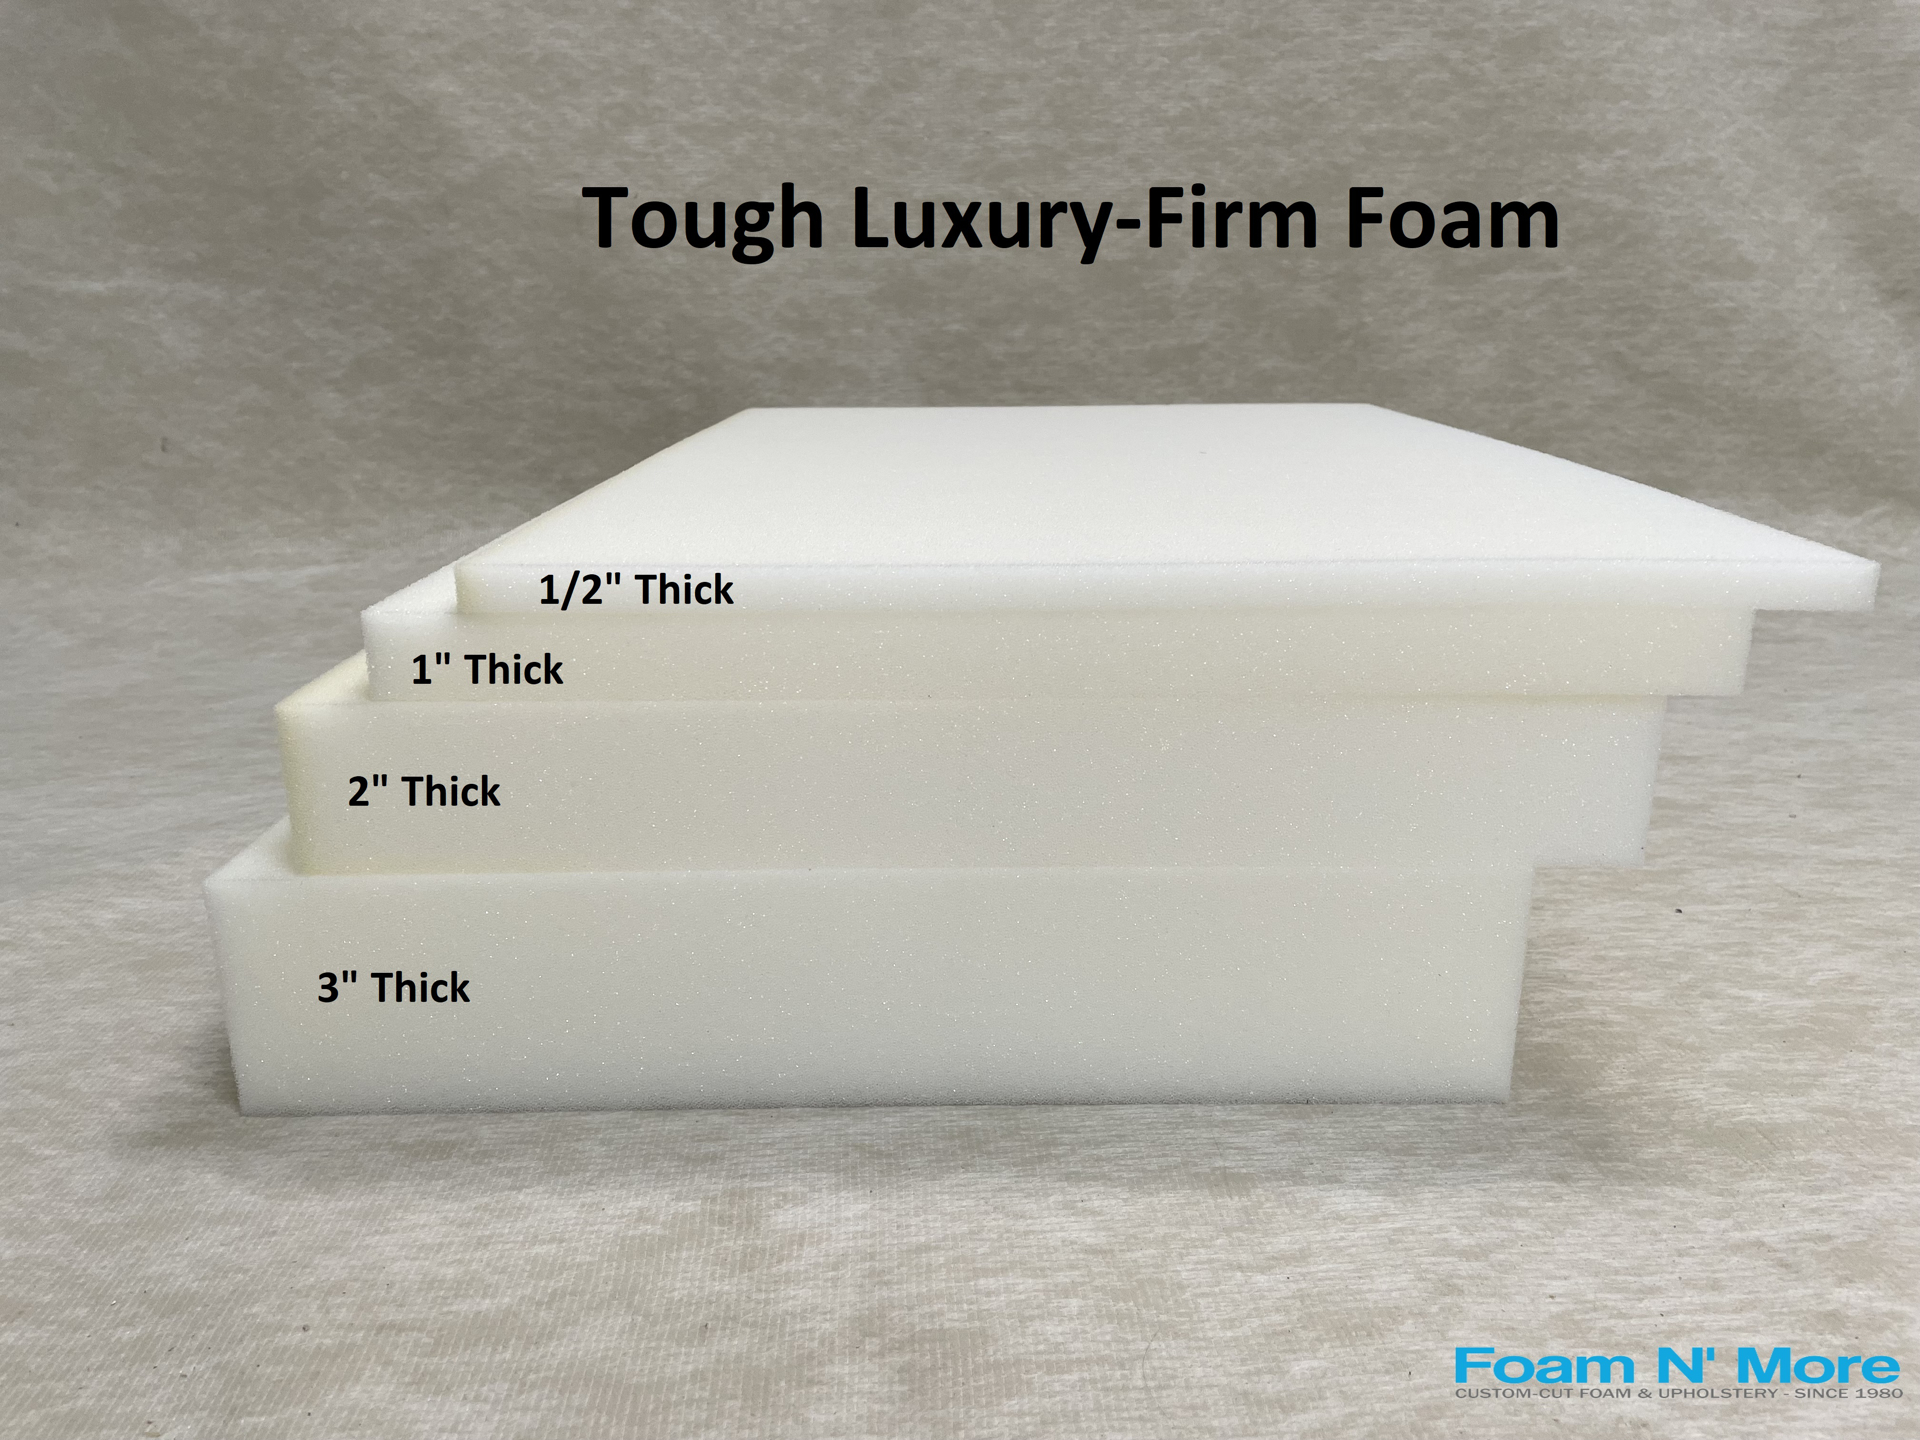 4 thick - High Density Upholstery Foam - Custom Sizes and Shapes